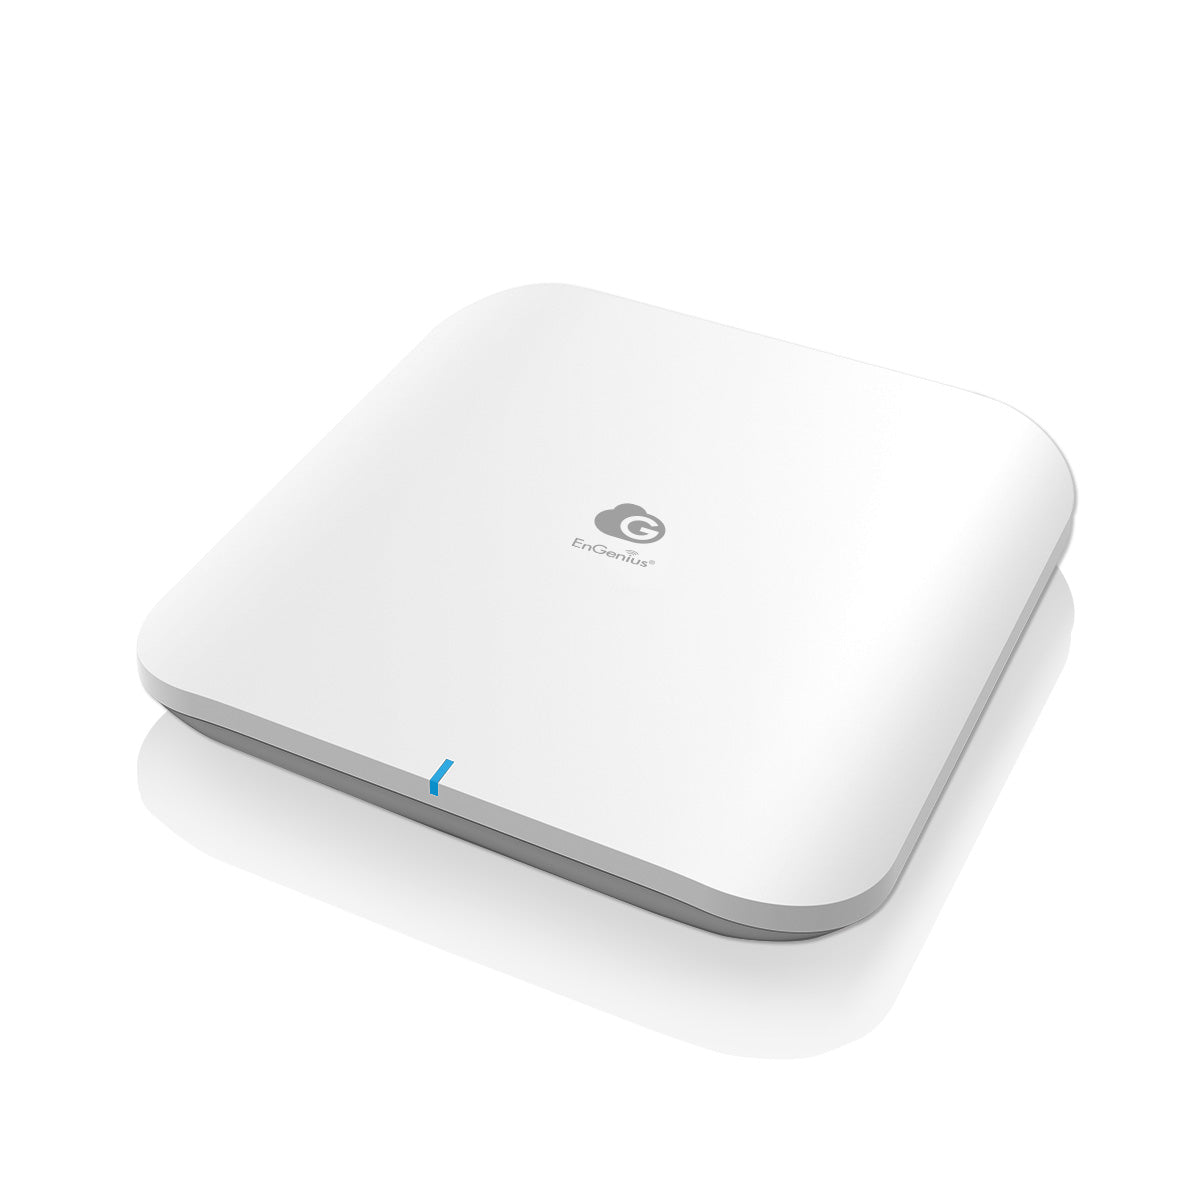 WiFi 7 Access Point